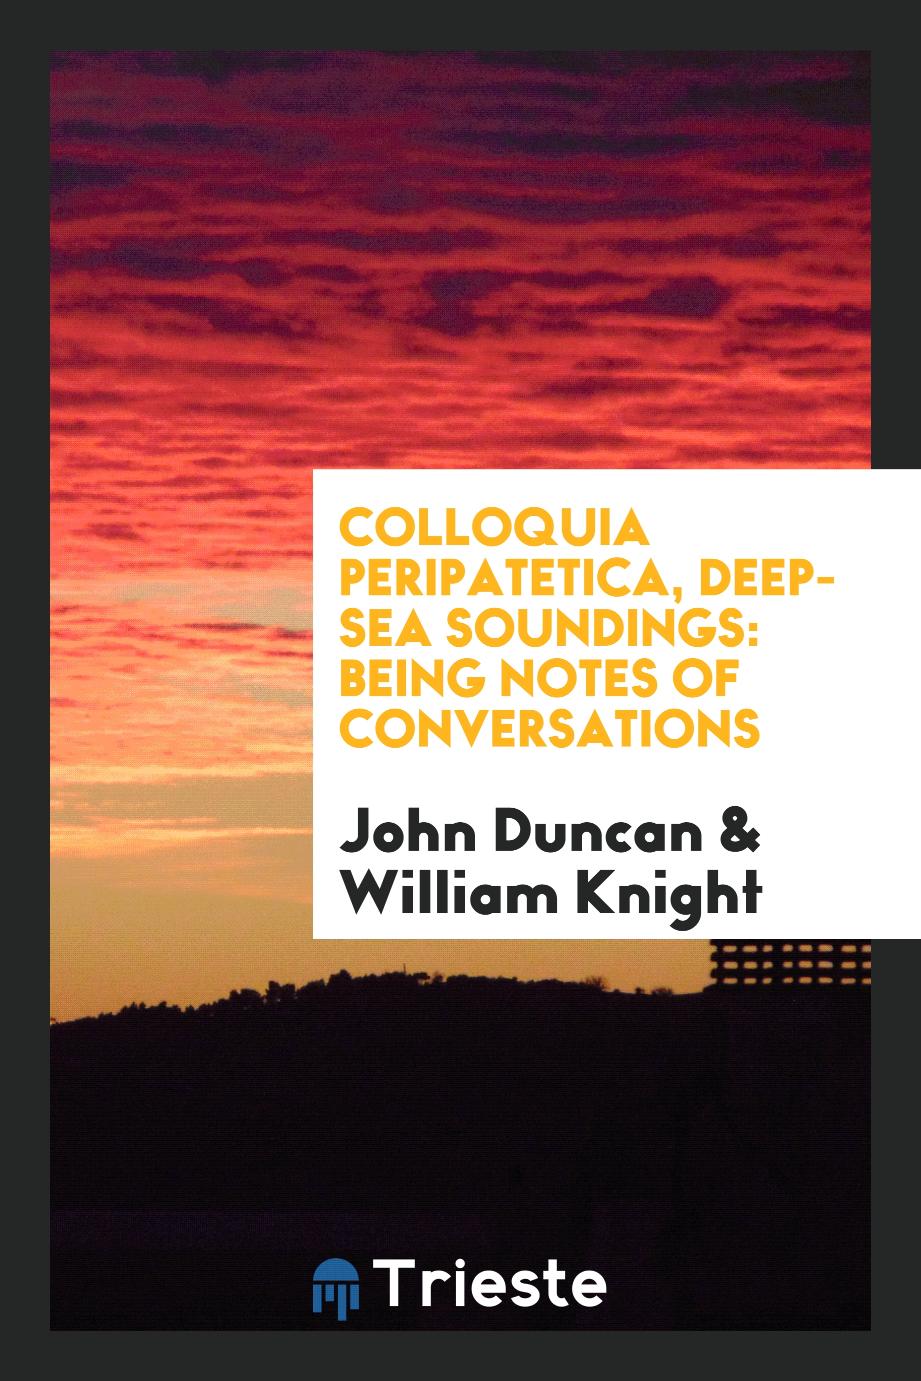 Colloquia peripatetica, deep-sea soundings: being notes of conversations